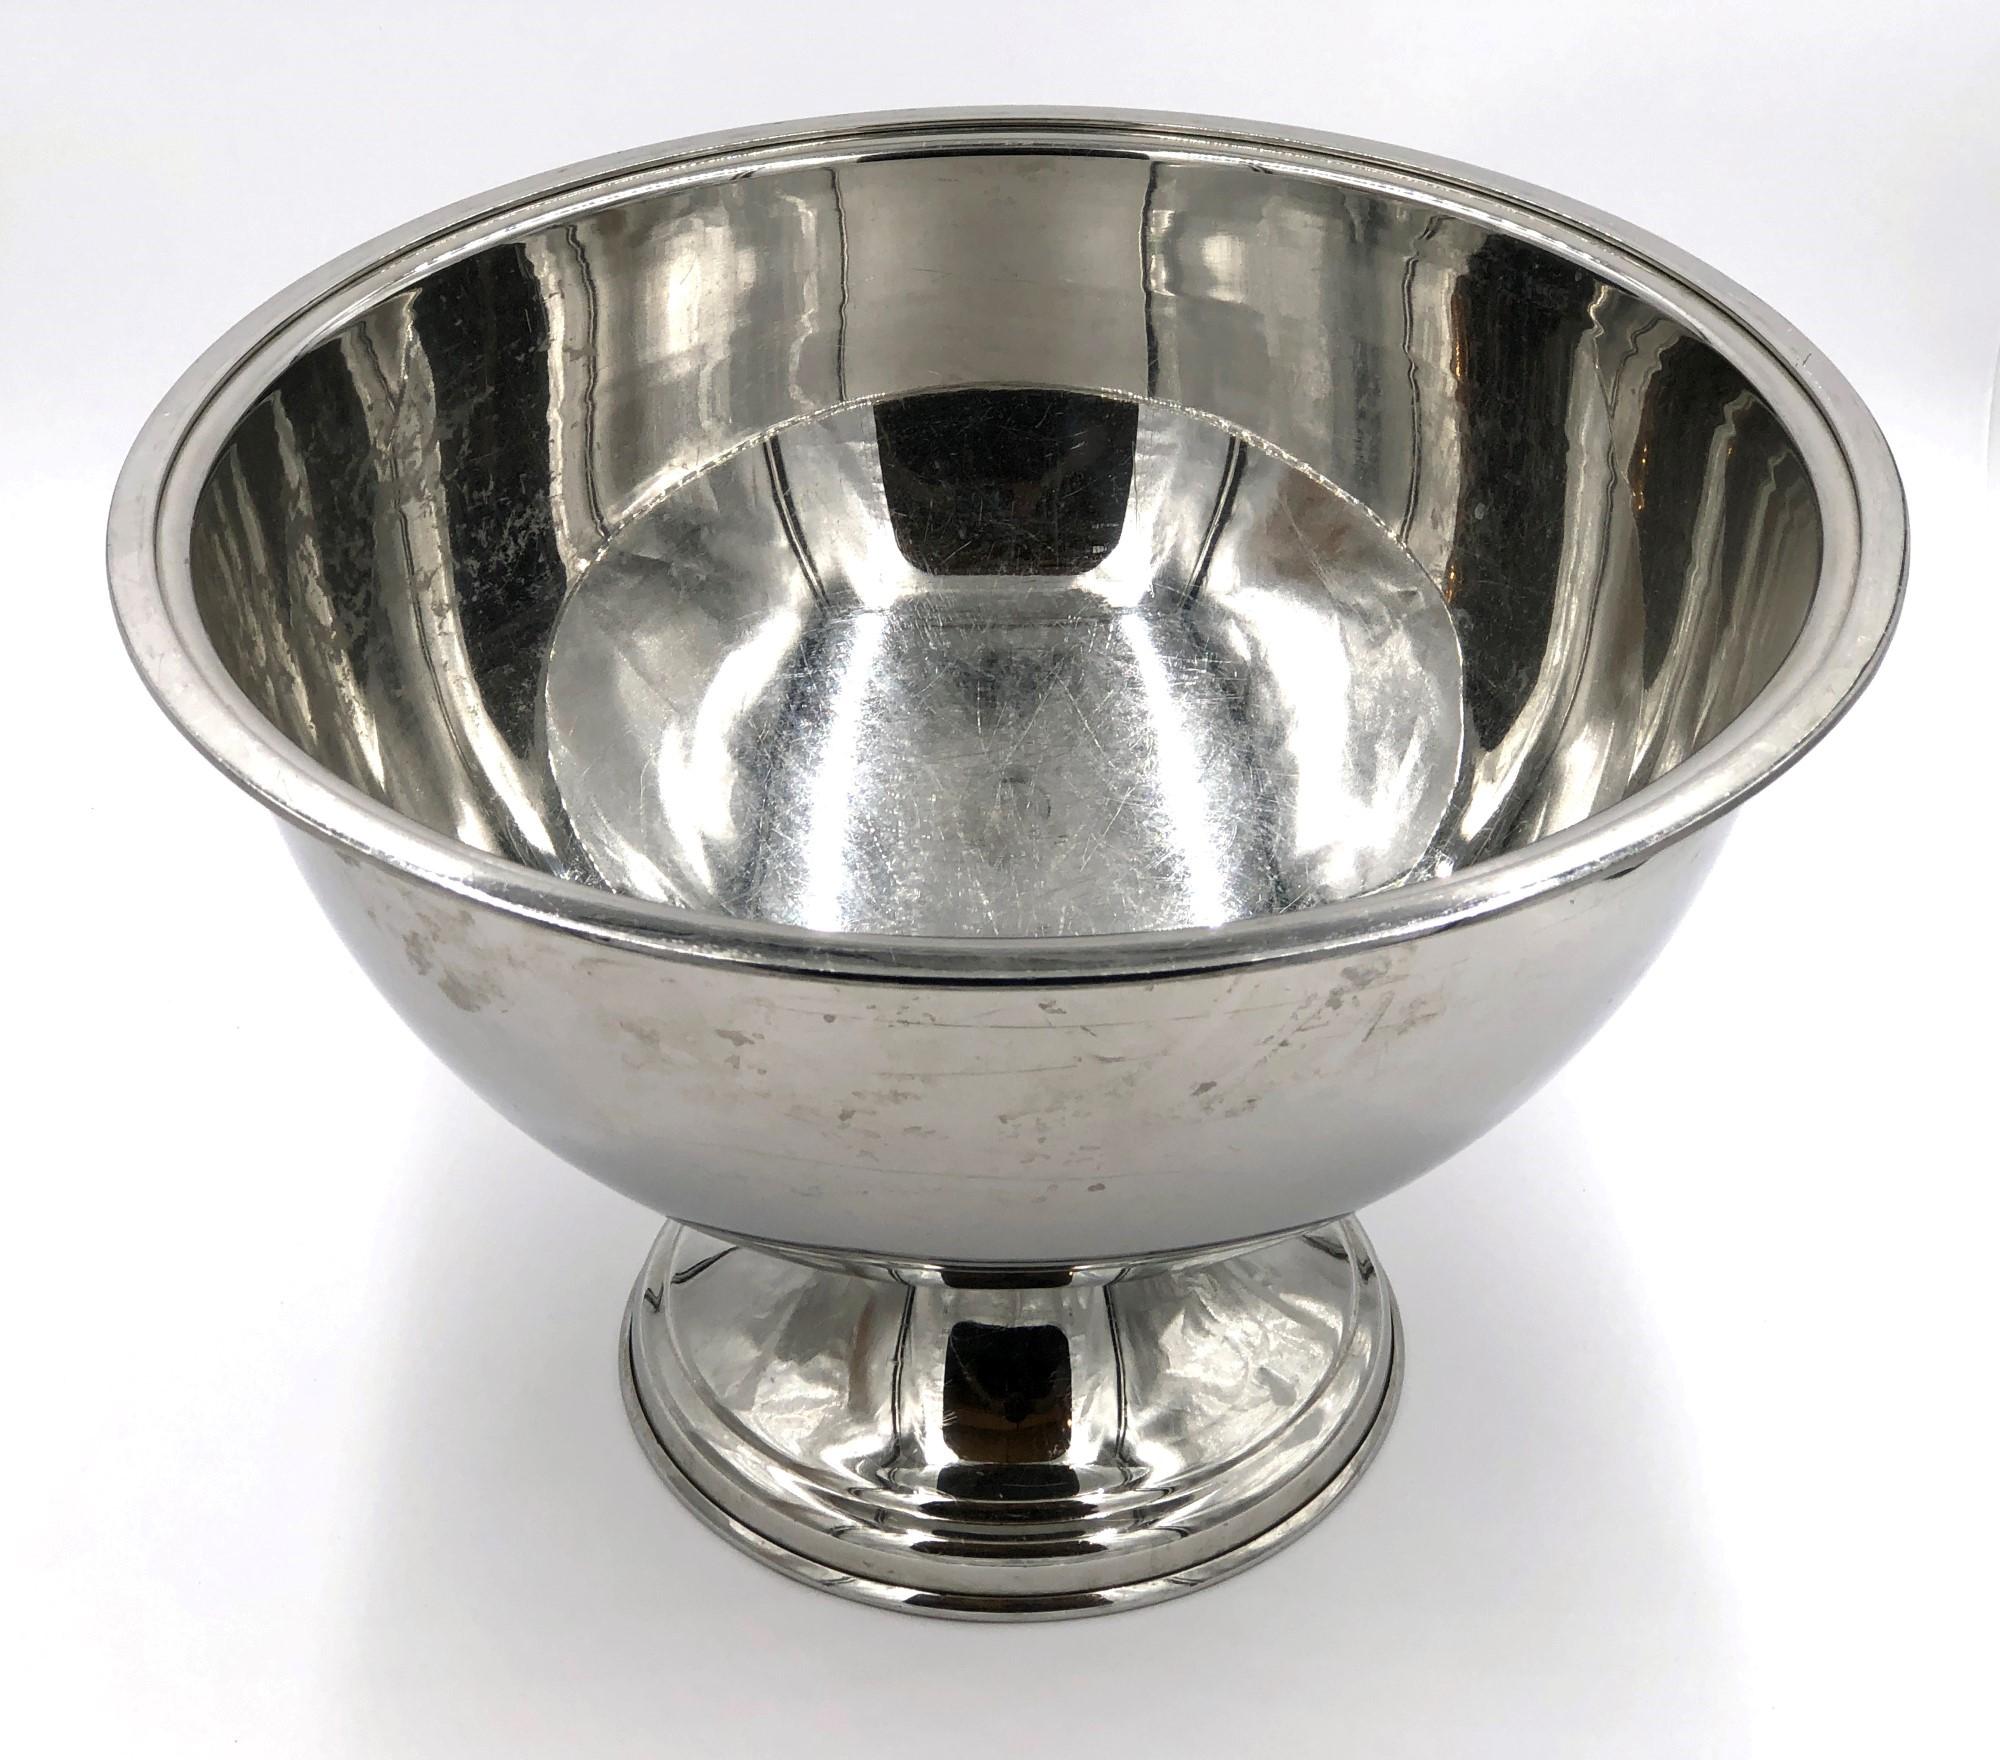 Stainless steel serving punch bowl. From The Waldorf Astoria Hotel on Park Ave in NYC. Waldorf Astoria authenticity card included with your purchase. Small quantity available at time of posting. Please inquire. Priced each. This can be seen at our